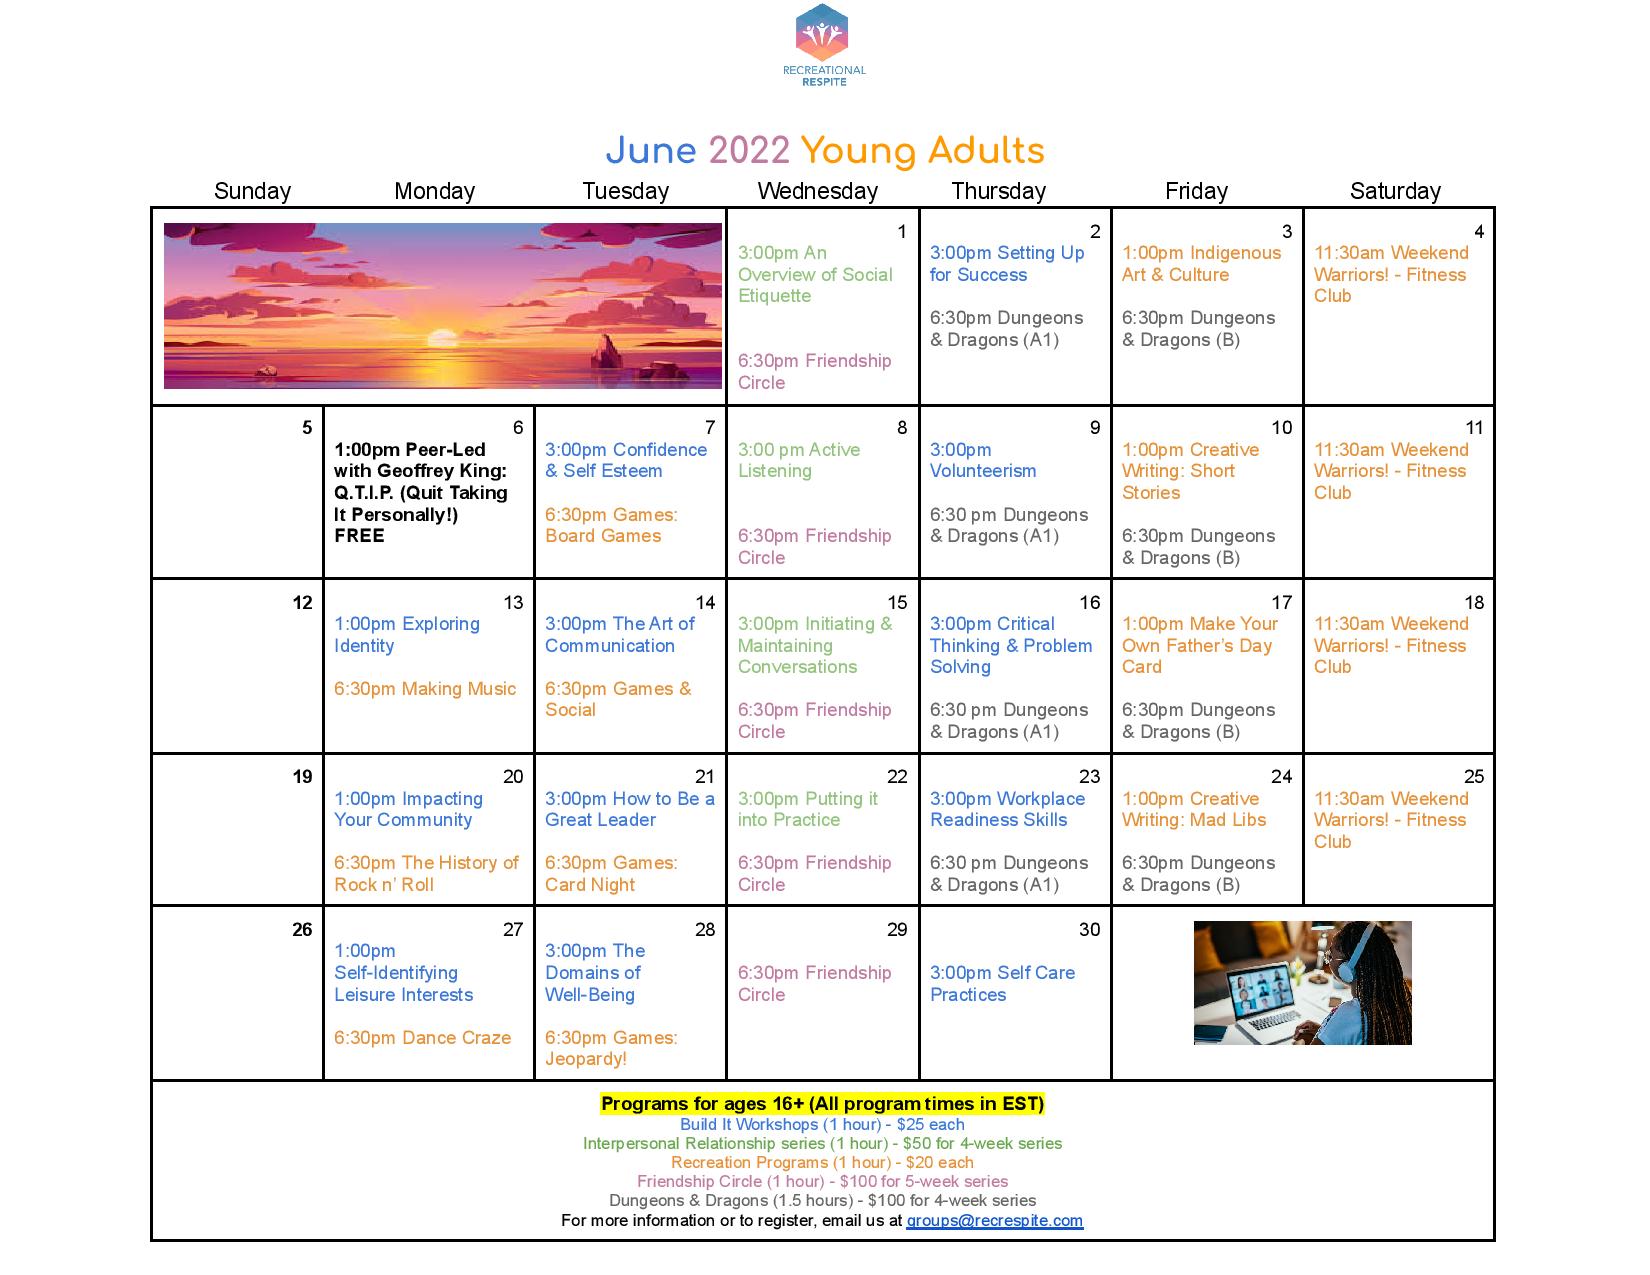 June 2022 calendar of programs for young adults ages 16 +